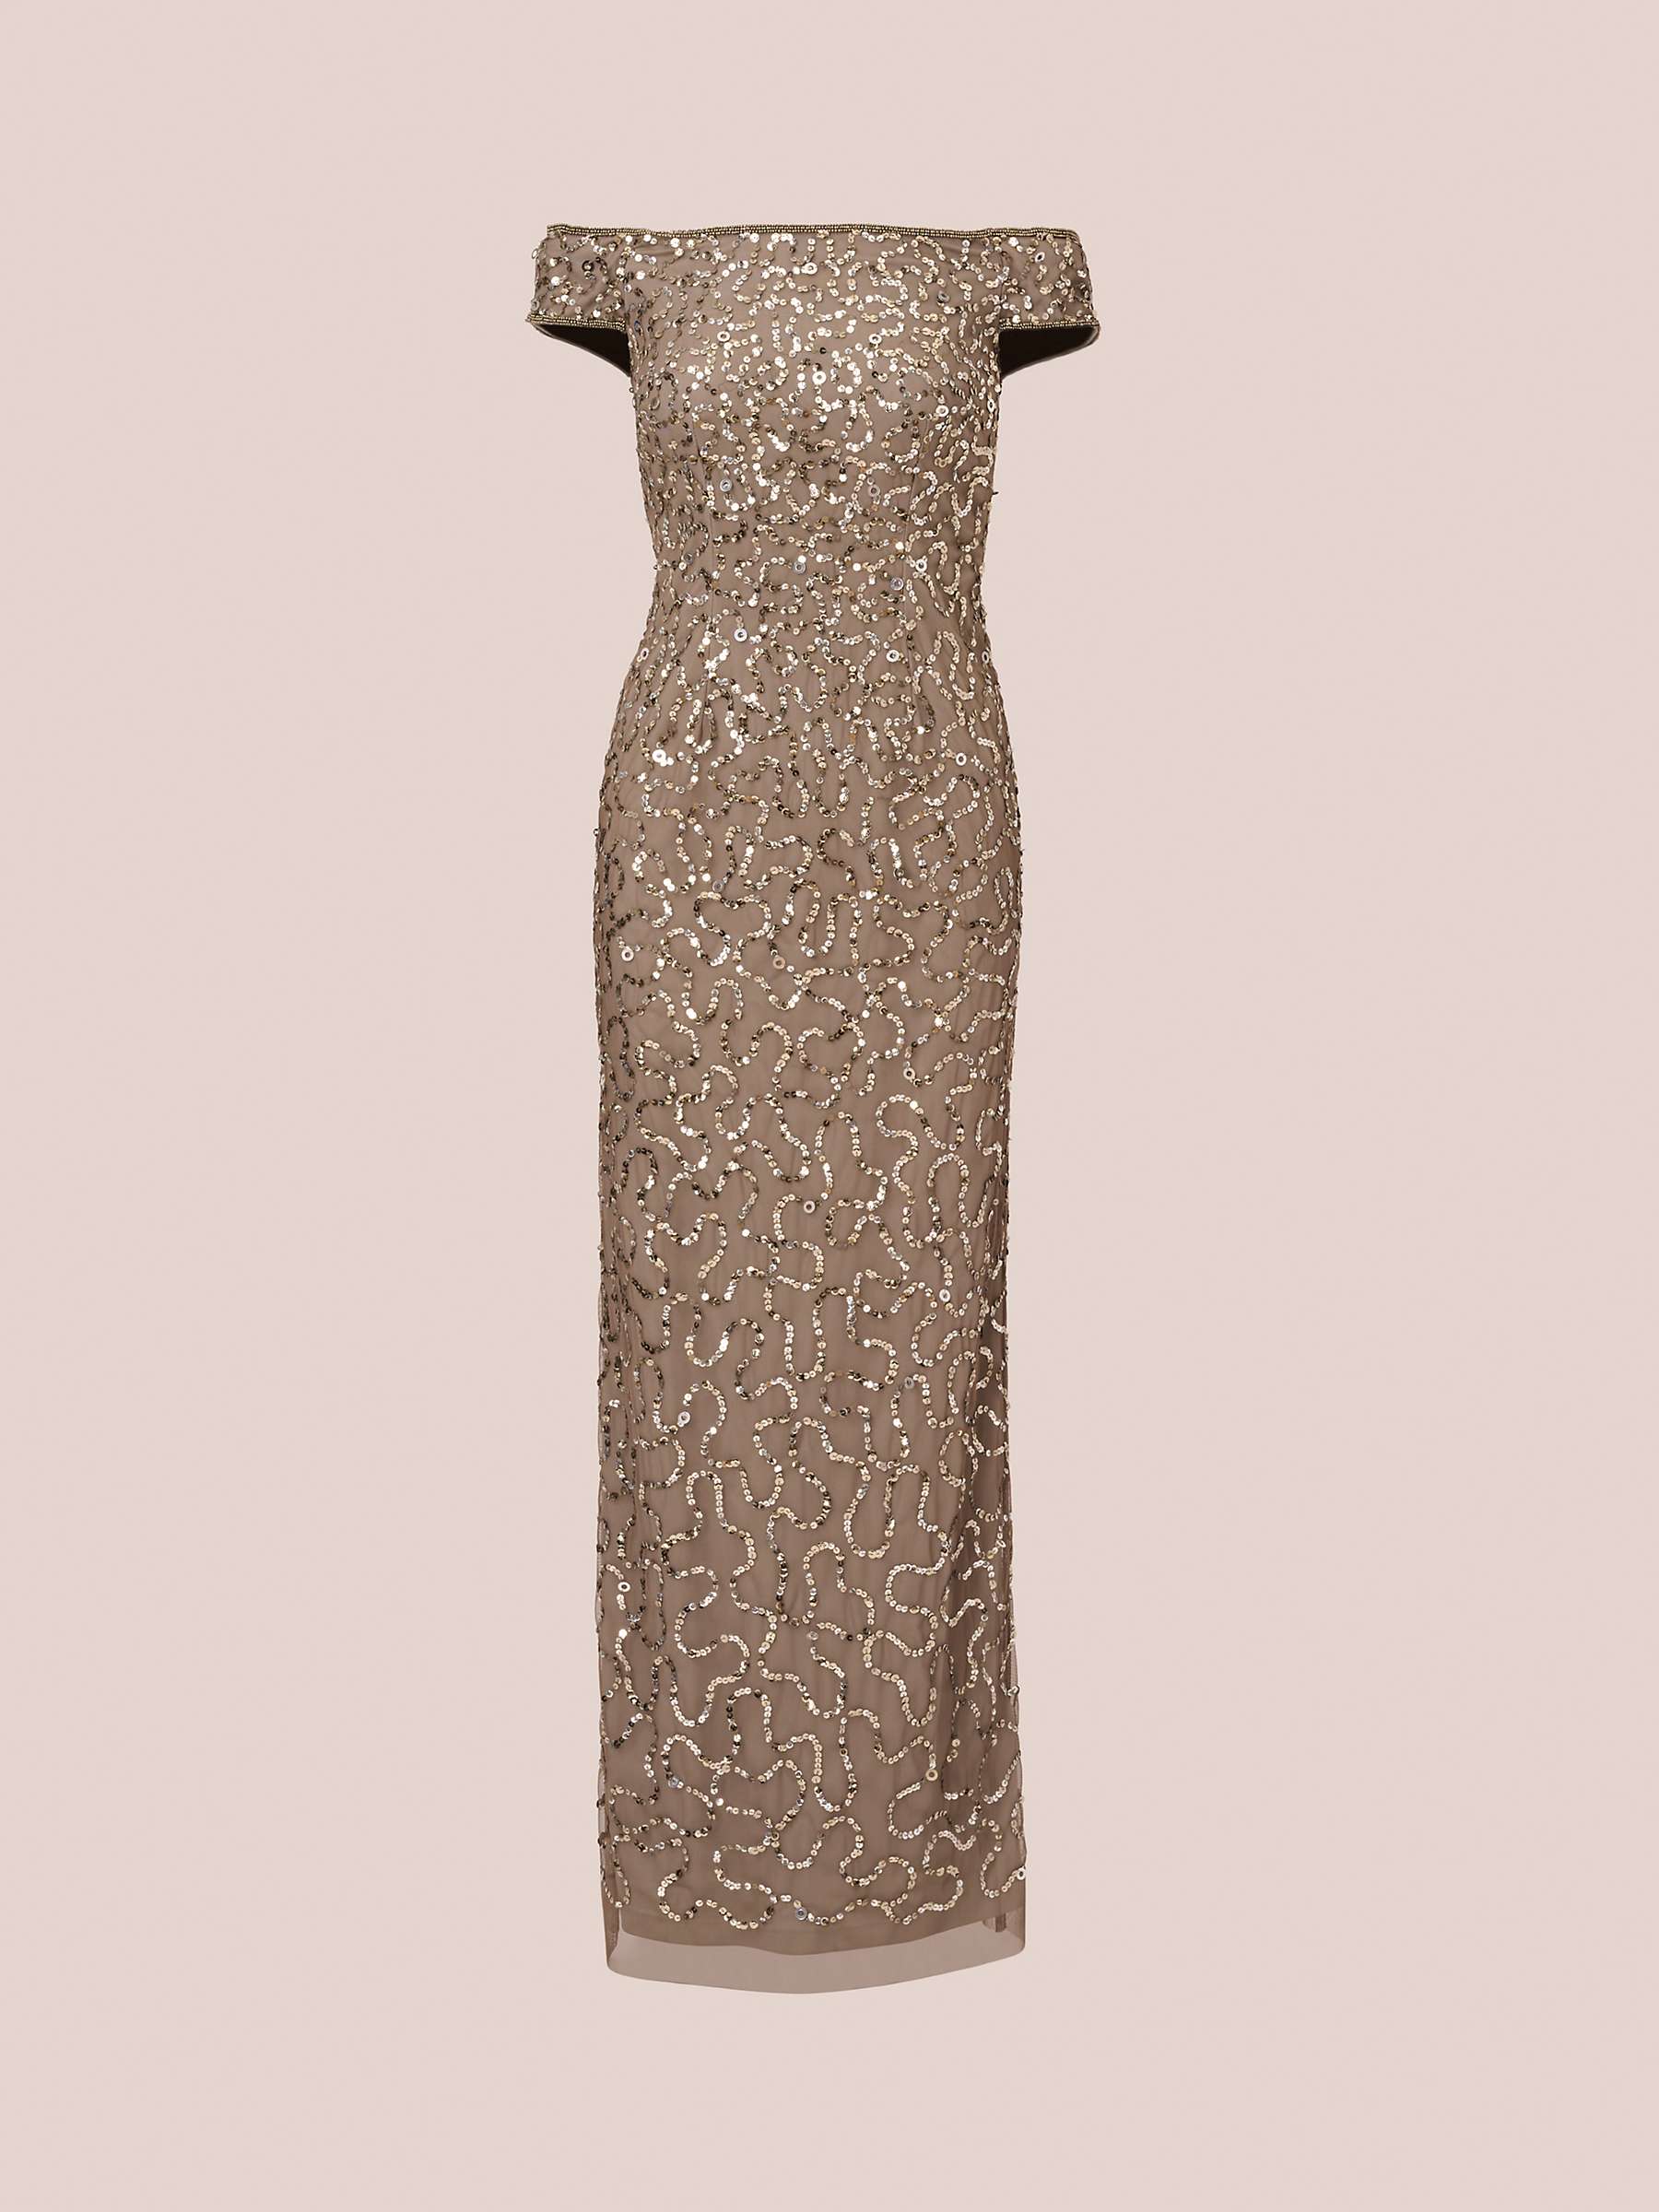 Buy Adrianna Papell Papell Studio Beaded Off the Shoulder Dress, Lead Online at johnlewis.com